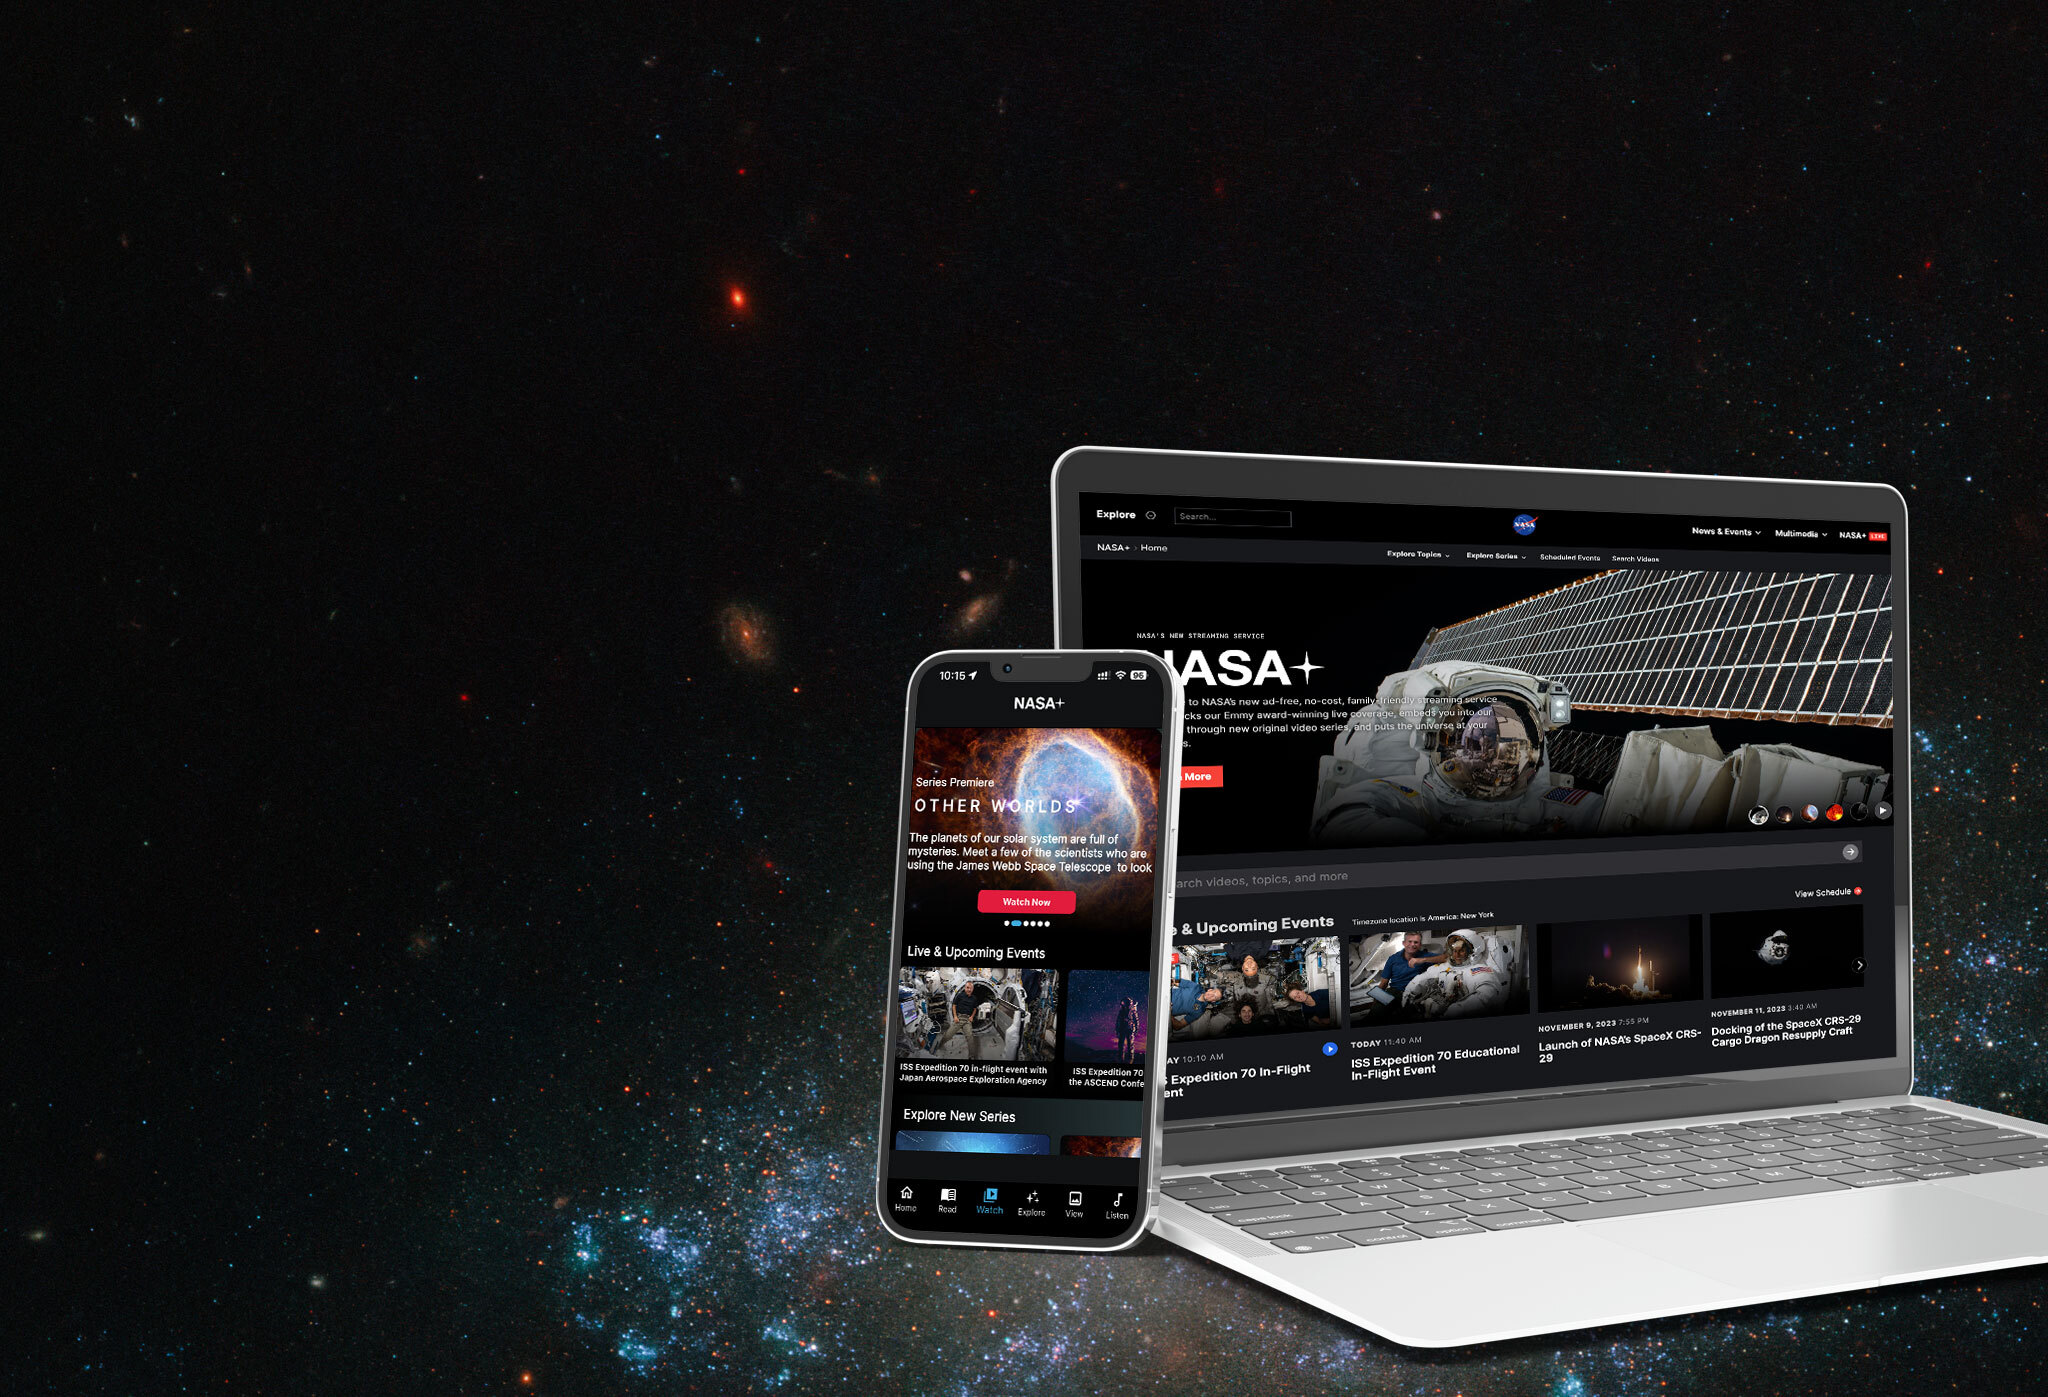 Screenshots of NASA+ are shown on a mobile phone and computer against a space-themed background